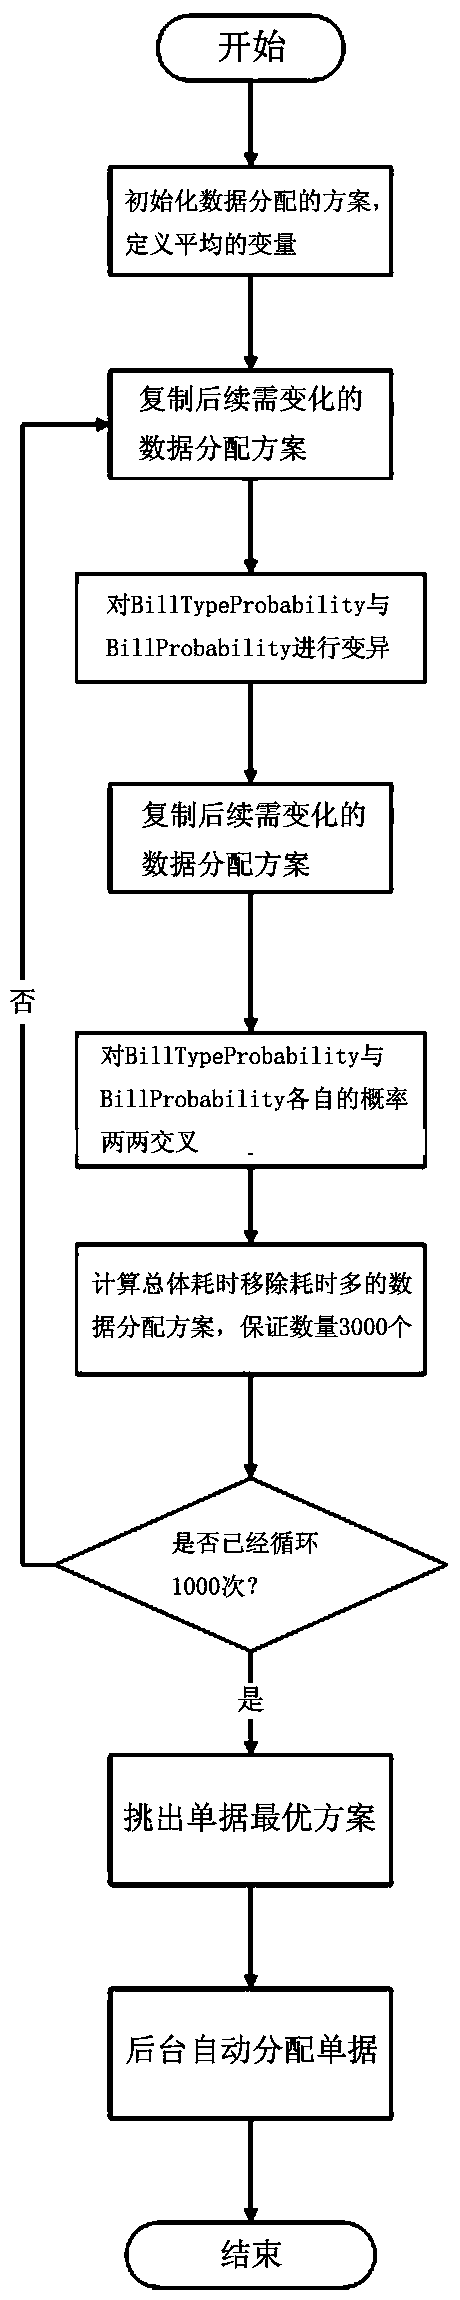 Method for automatically allocating documents based on genetic algorithm